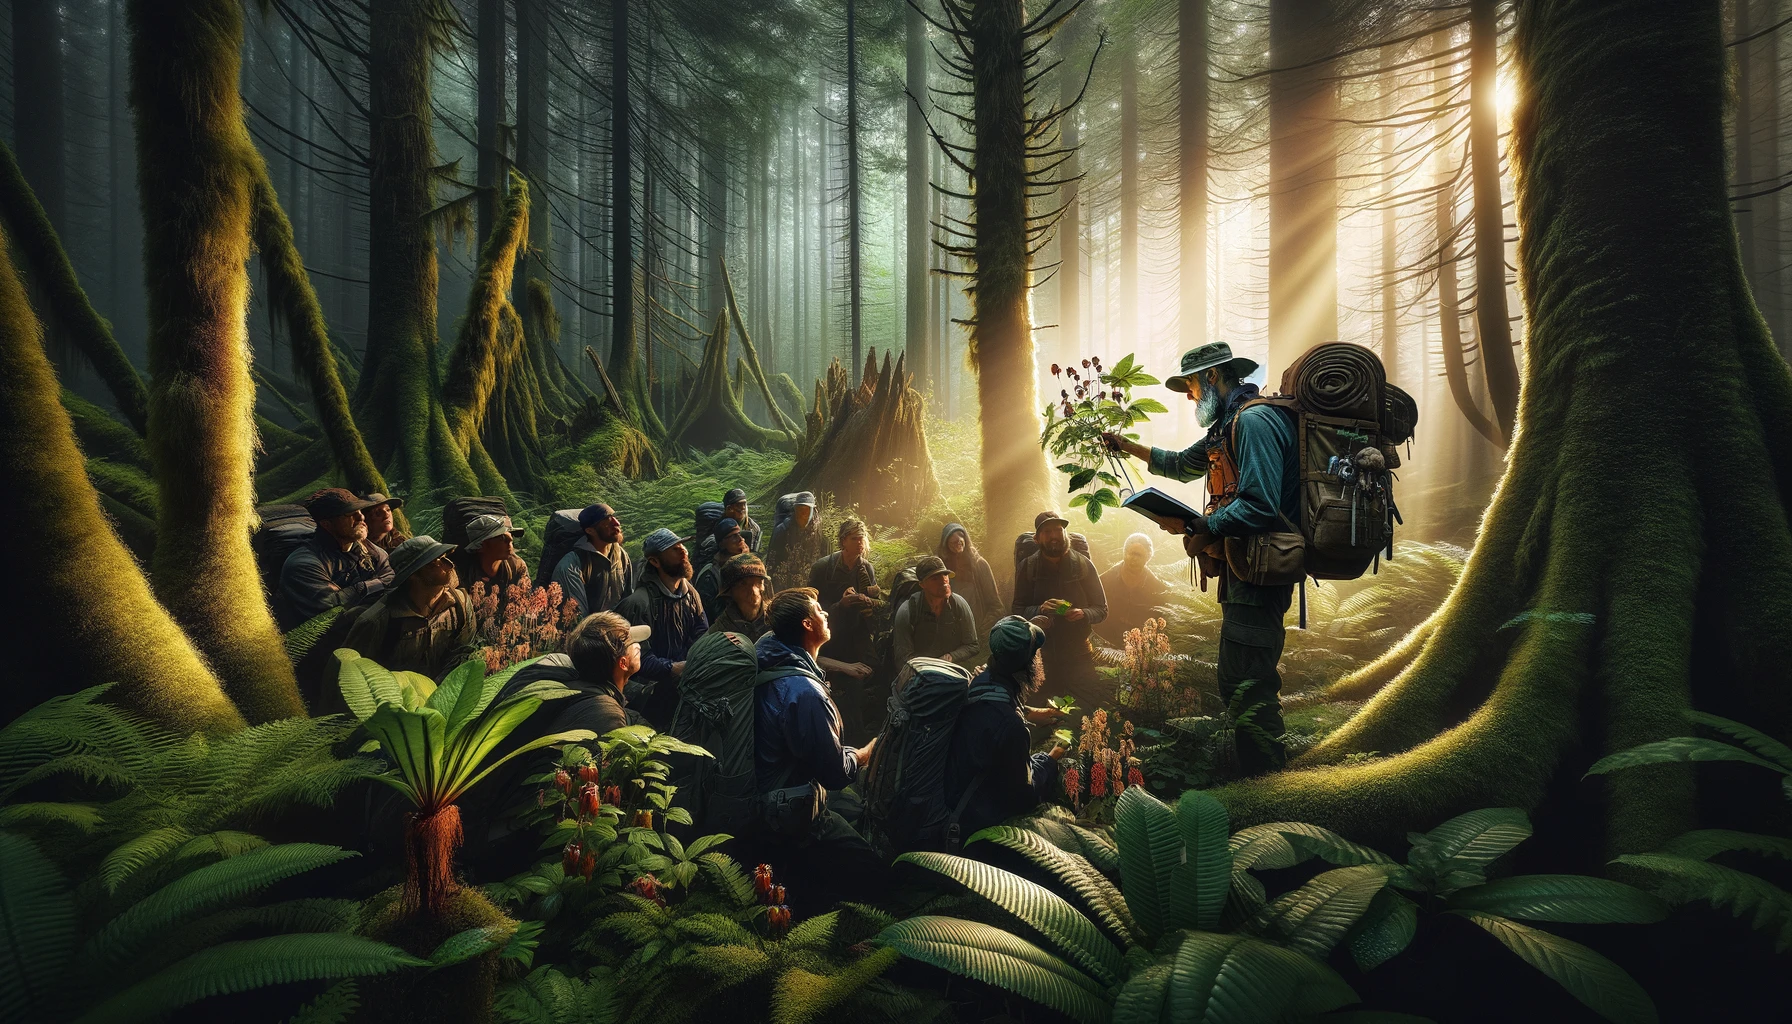 Seasoned forager demonstrating edible and medicinal plant identification to learners in a dense forest at sunset. Equipped with rugged gear and guidebooks, the group explores nature's bounty, highlighting the essential survival skills and respect for the natural world. This scene captures the essence of self-reliance and the transfer of knowledge, inspiring awe for the practice of foraging